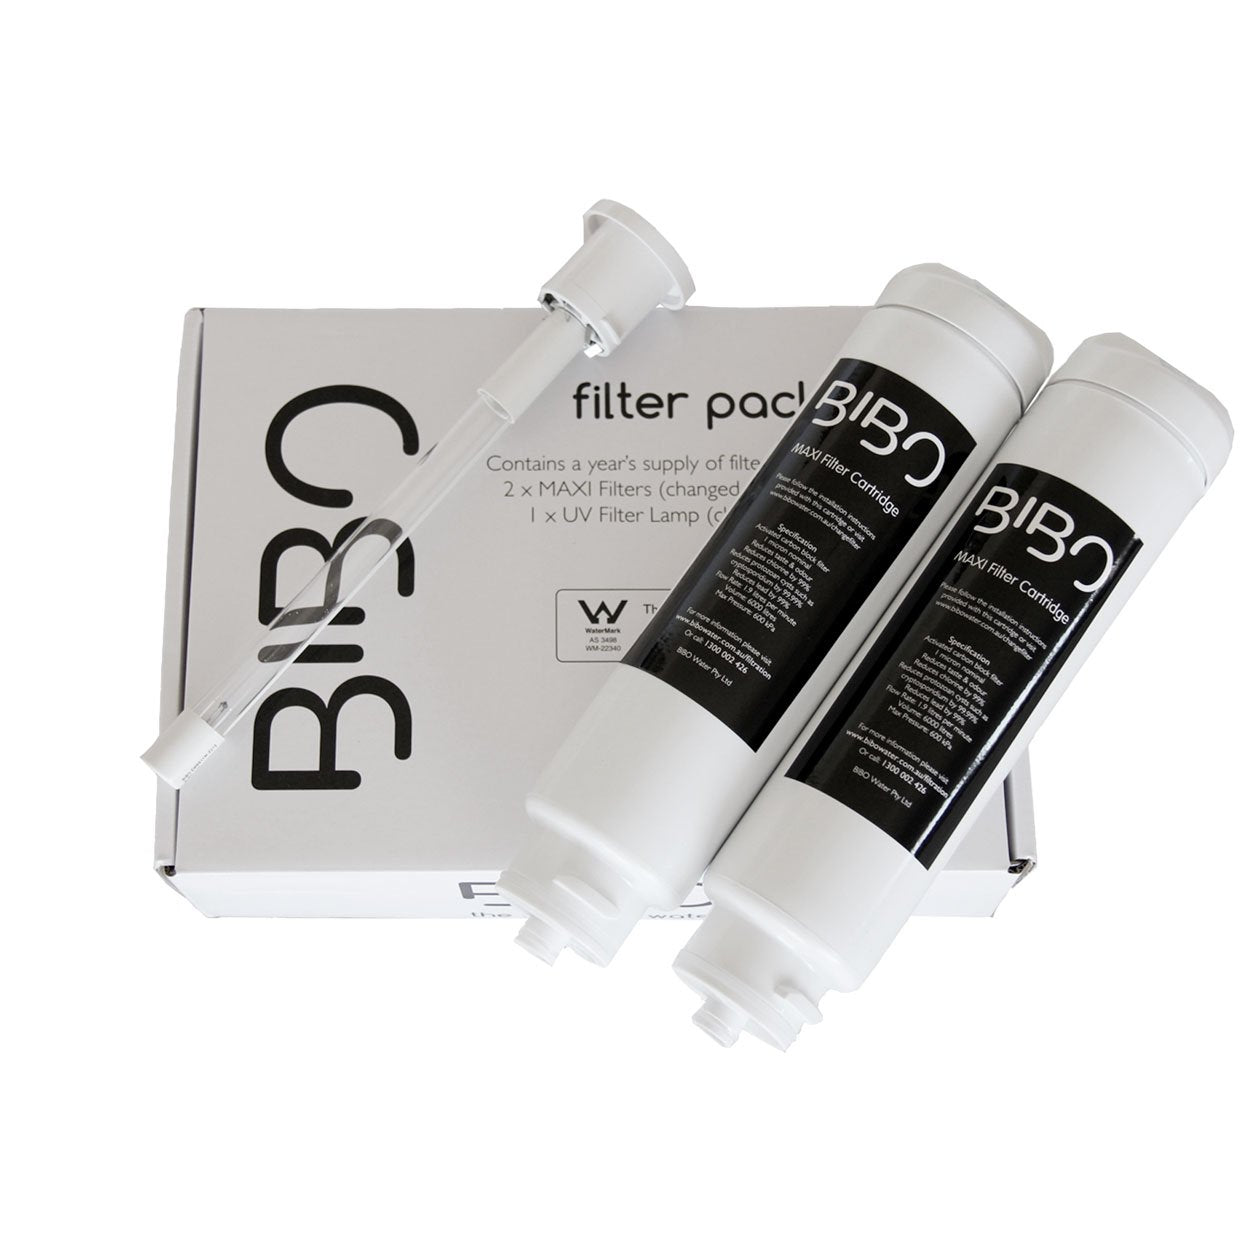 BIBO Annual Replacement Water Filter Pack